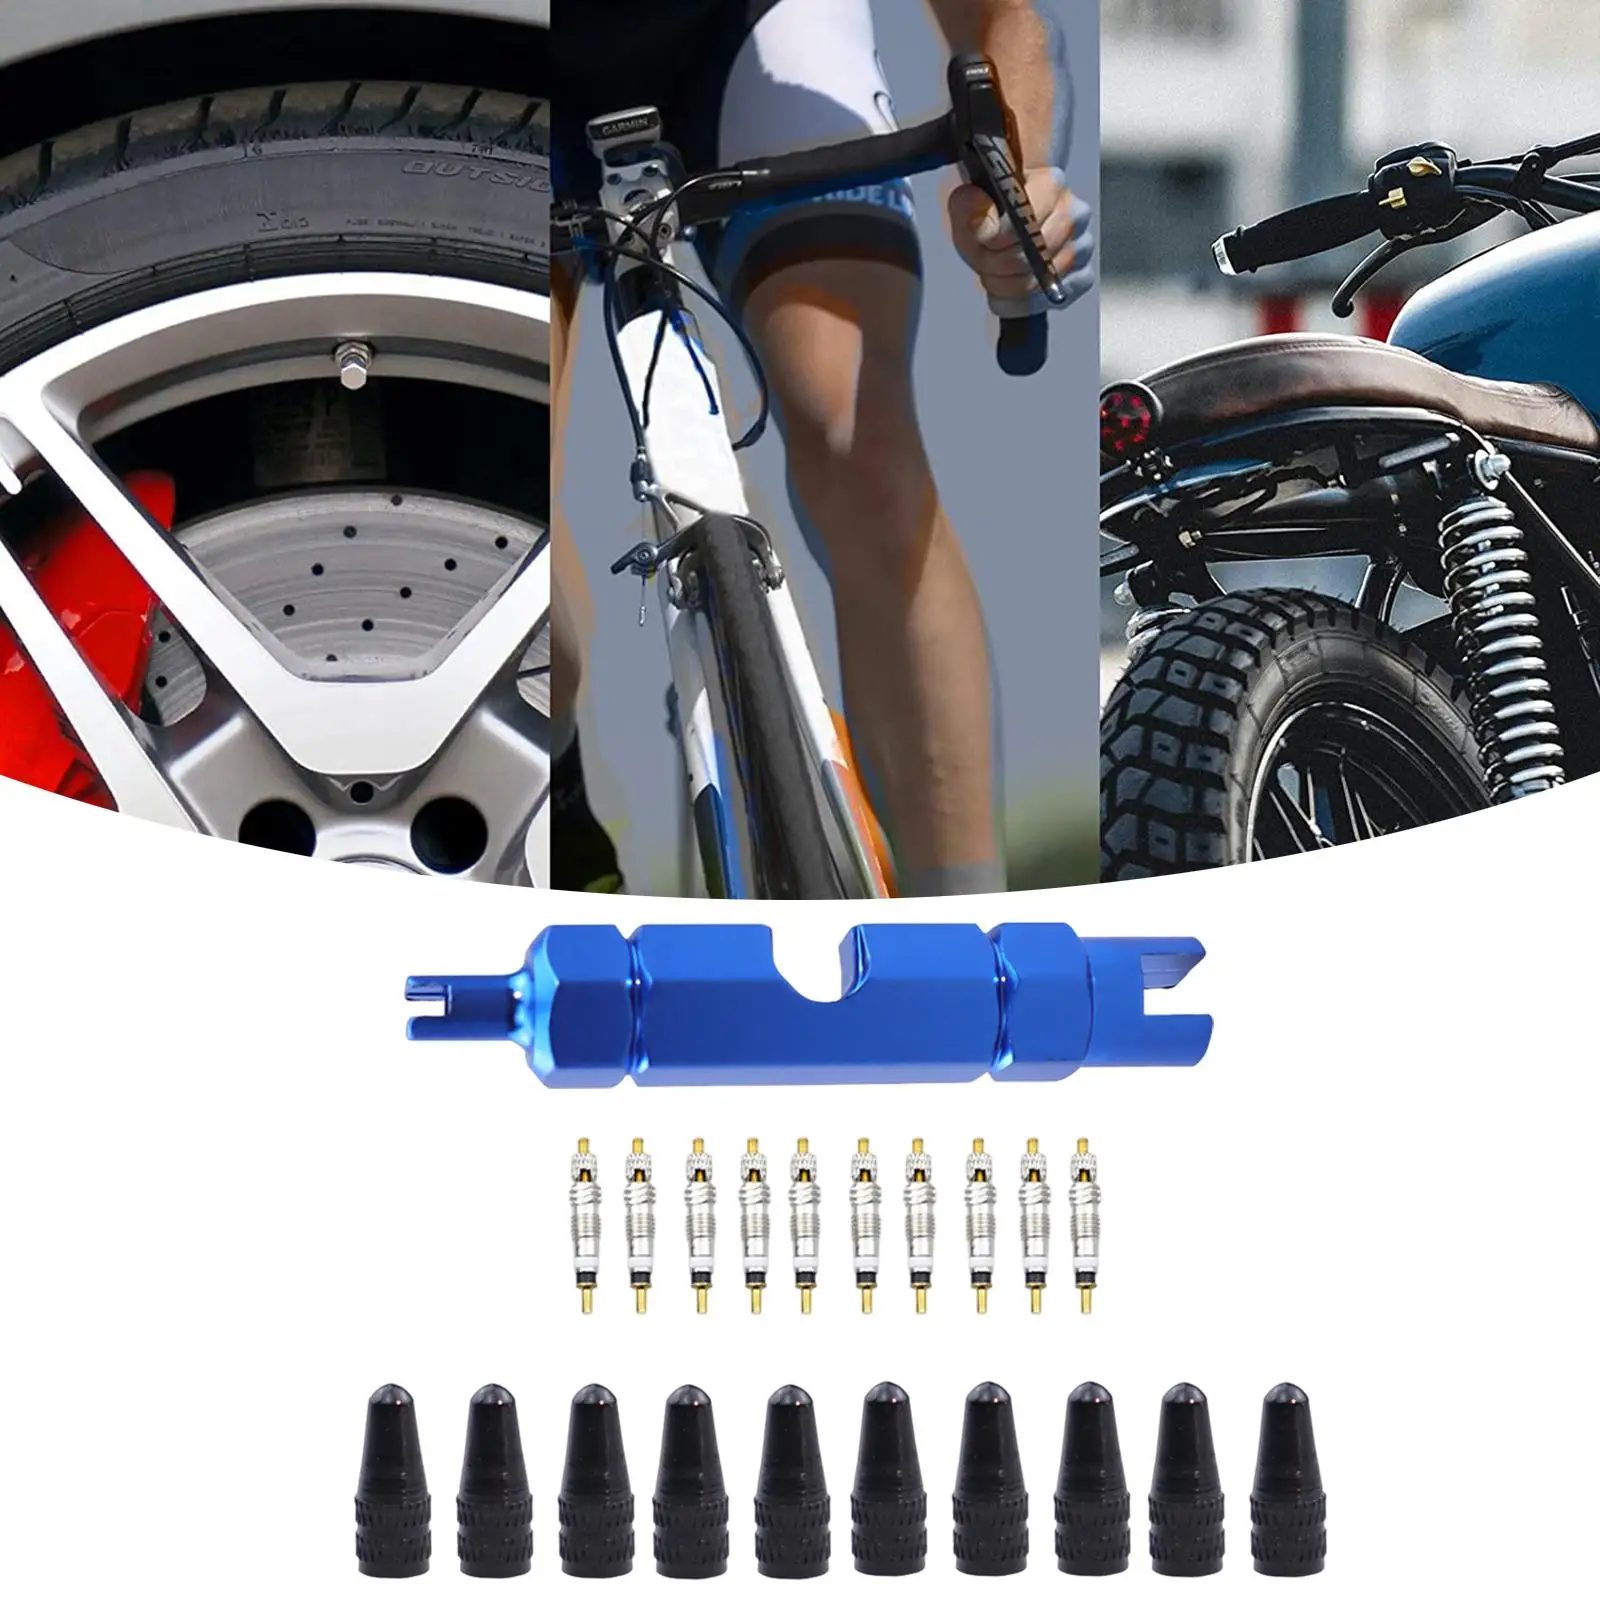 Tire Valve Stem Puller Tools Set Sturdy Practical Professional for Car, Bicycle, RV, ATV Tire Repair Tool Valve Core Wrench